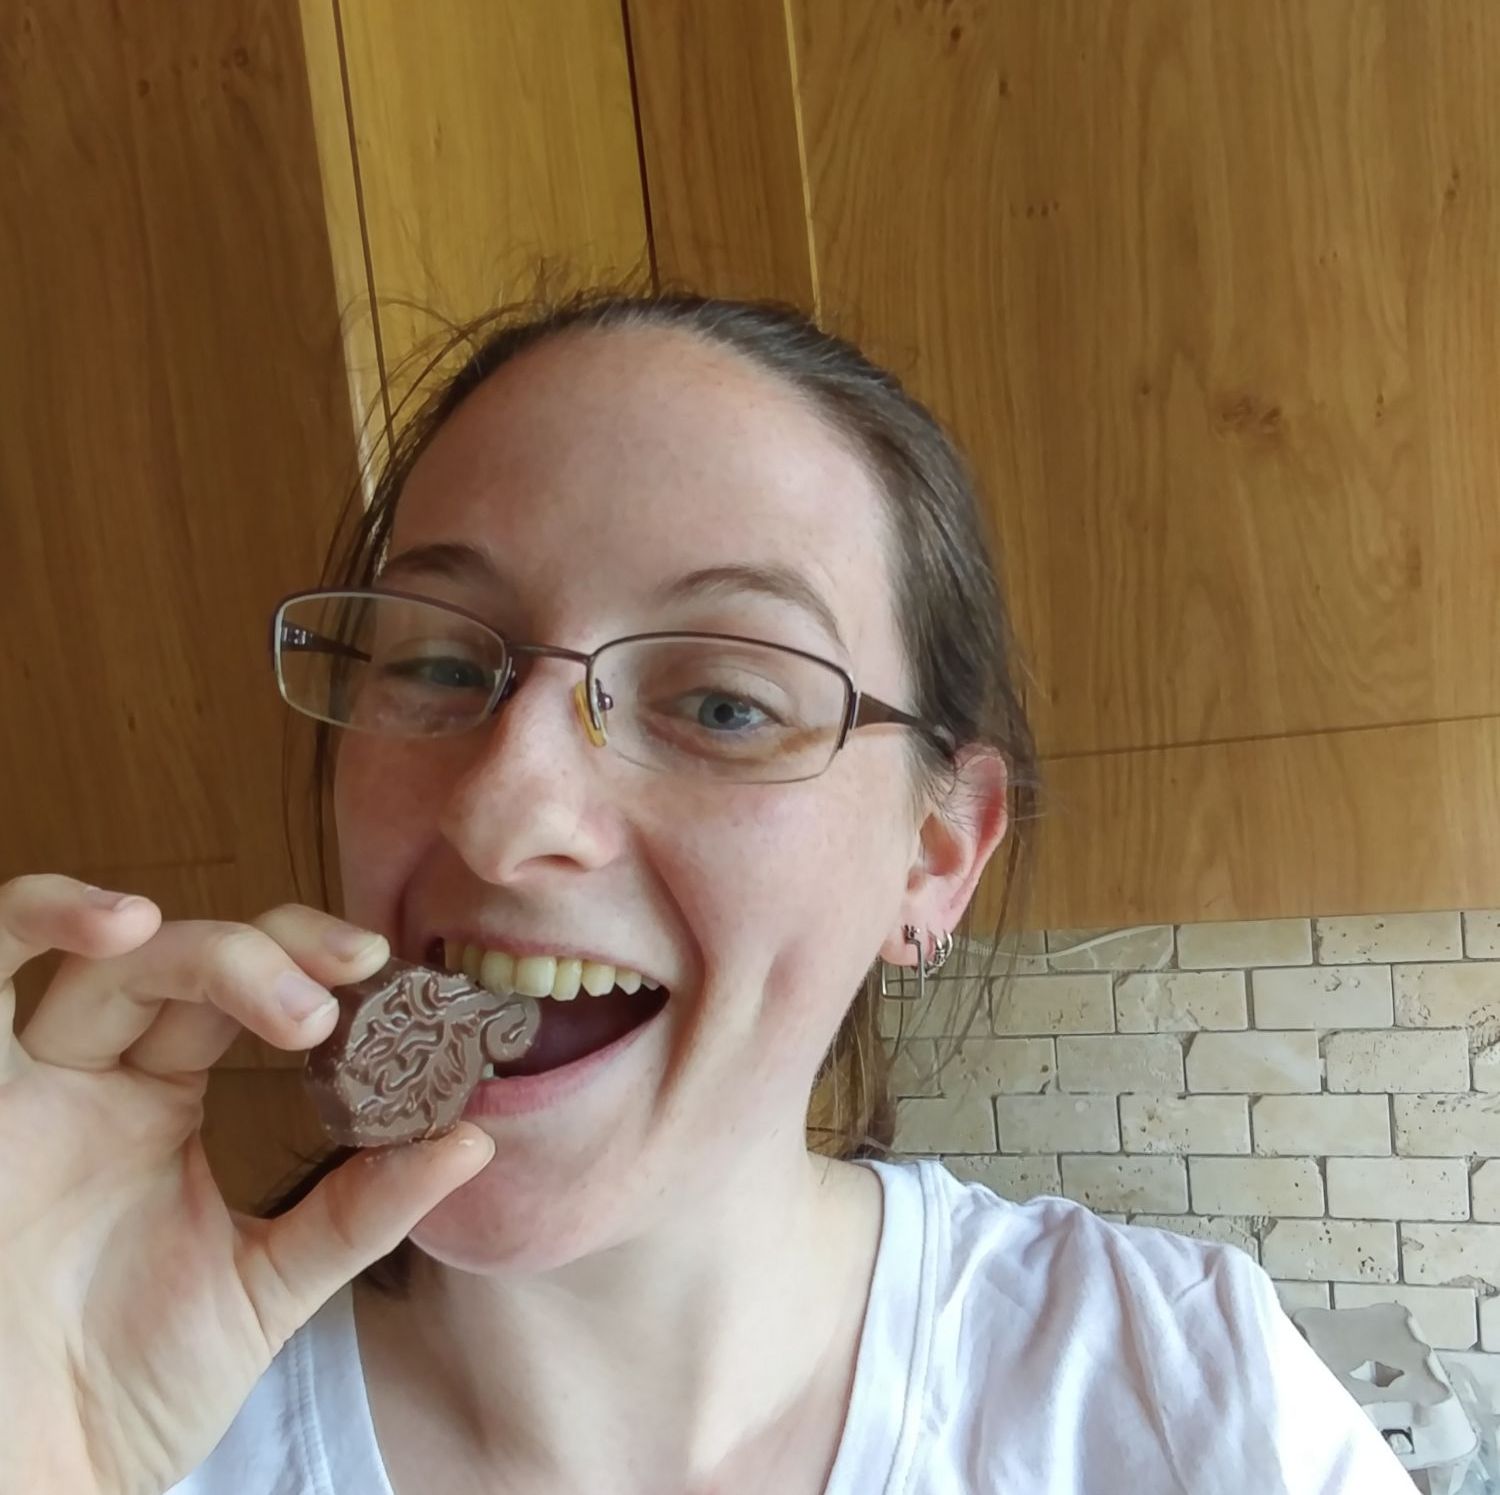 An image of Caz with kitchen units in the background behind her. She is eating a chocolate shaped like a placenta.